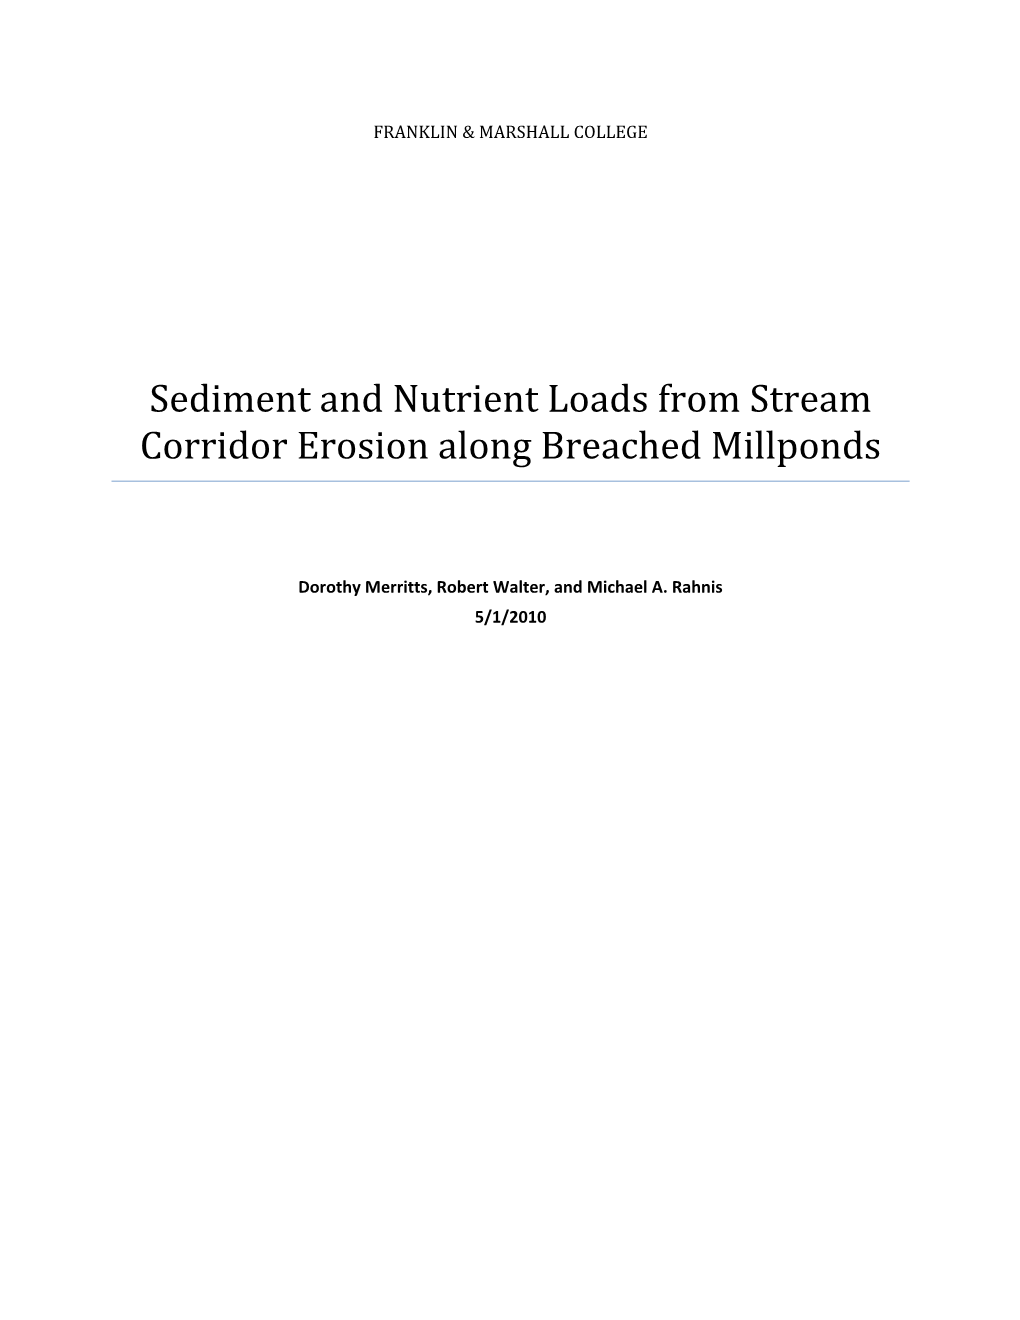 Sediment and Nutrient Loads from Stream Corridor Erosion Along Breached Millponds